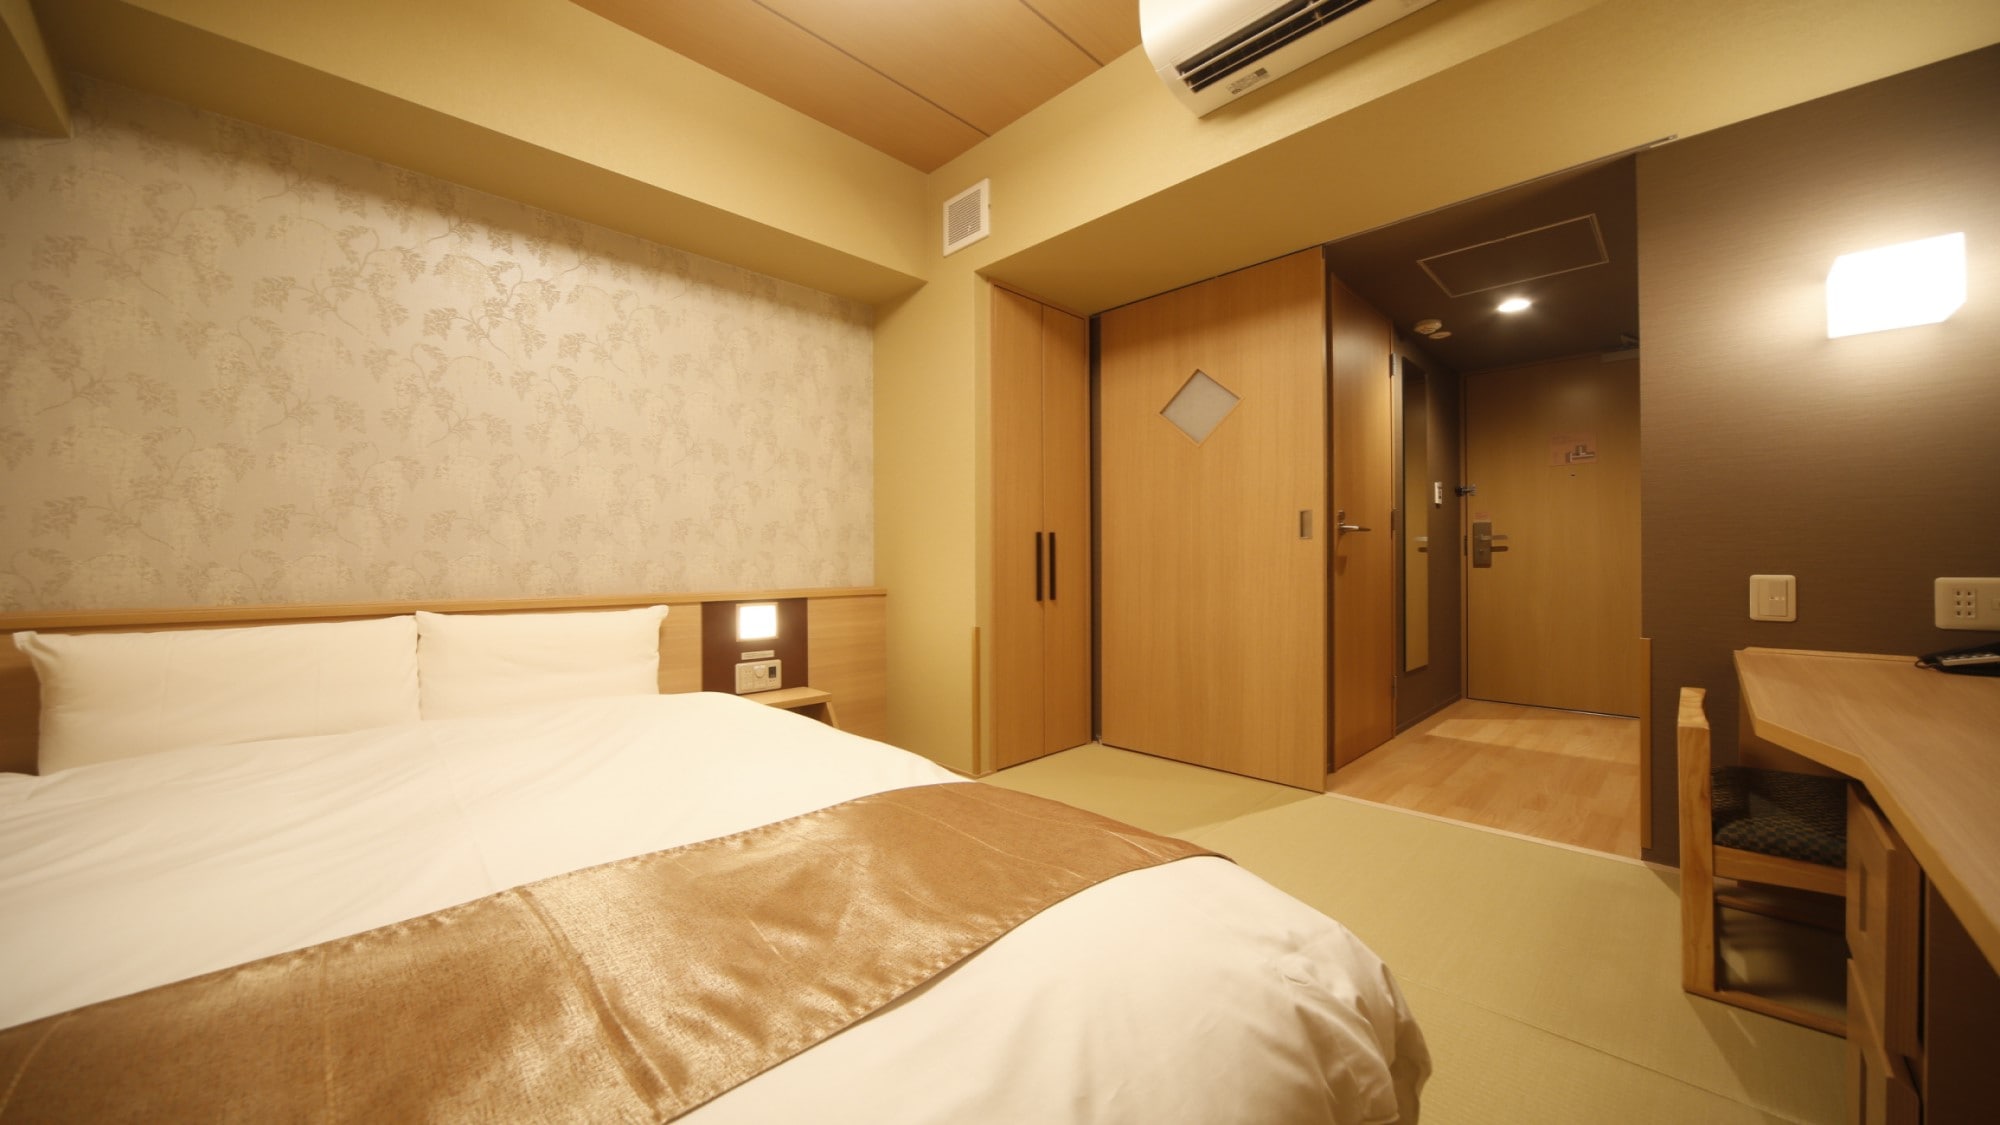 Double room [No smoking] (140 & times; 195 cm) 15.80-16.30 square meters ◆ Serta bed equipped ◆